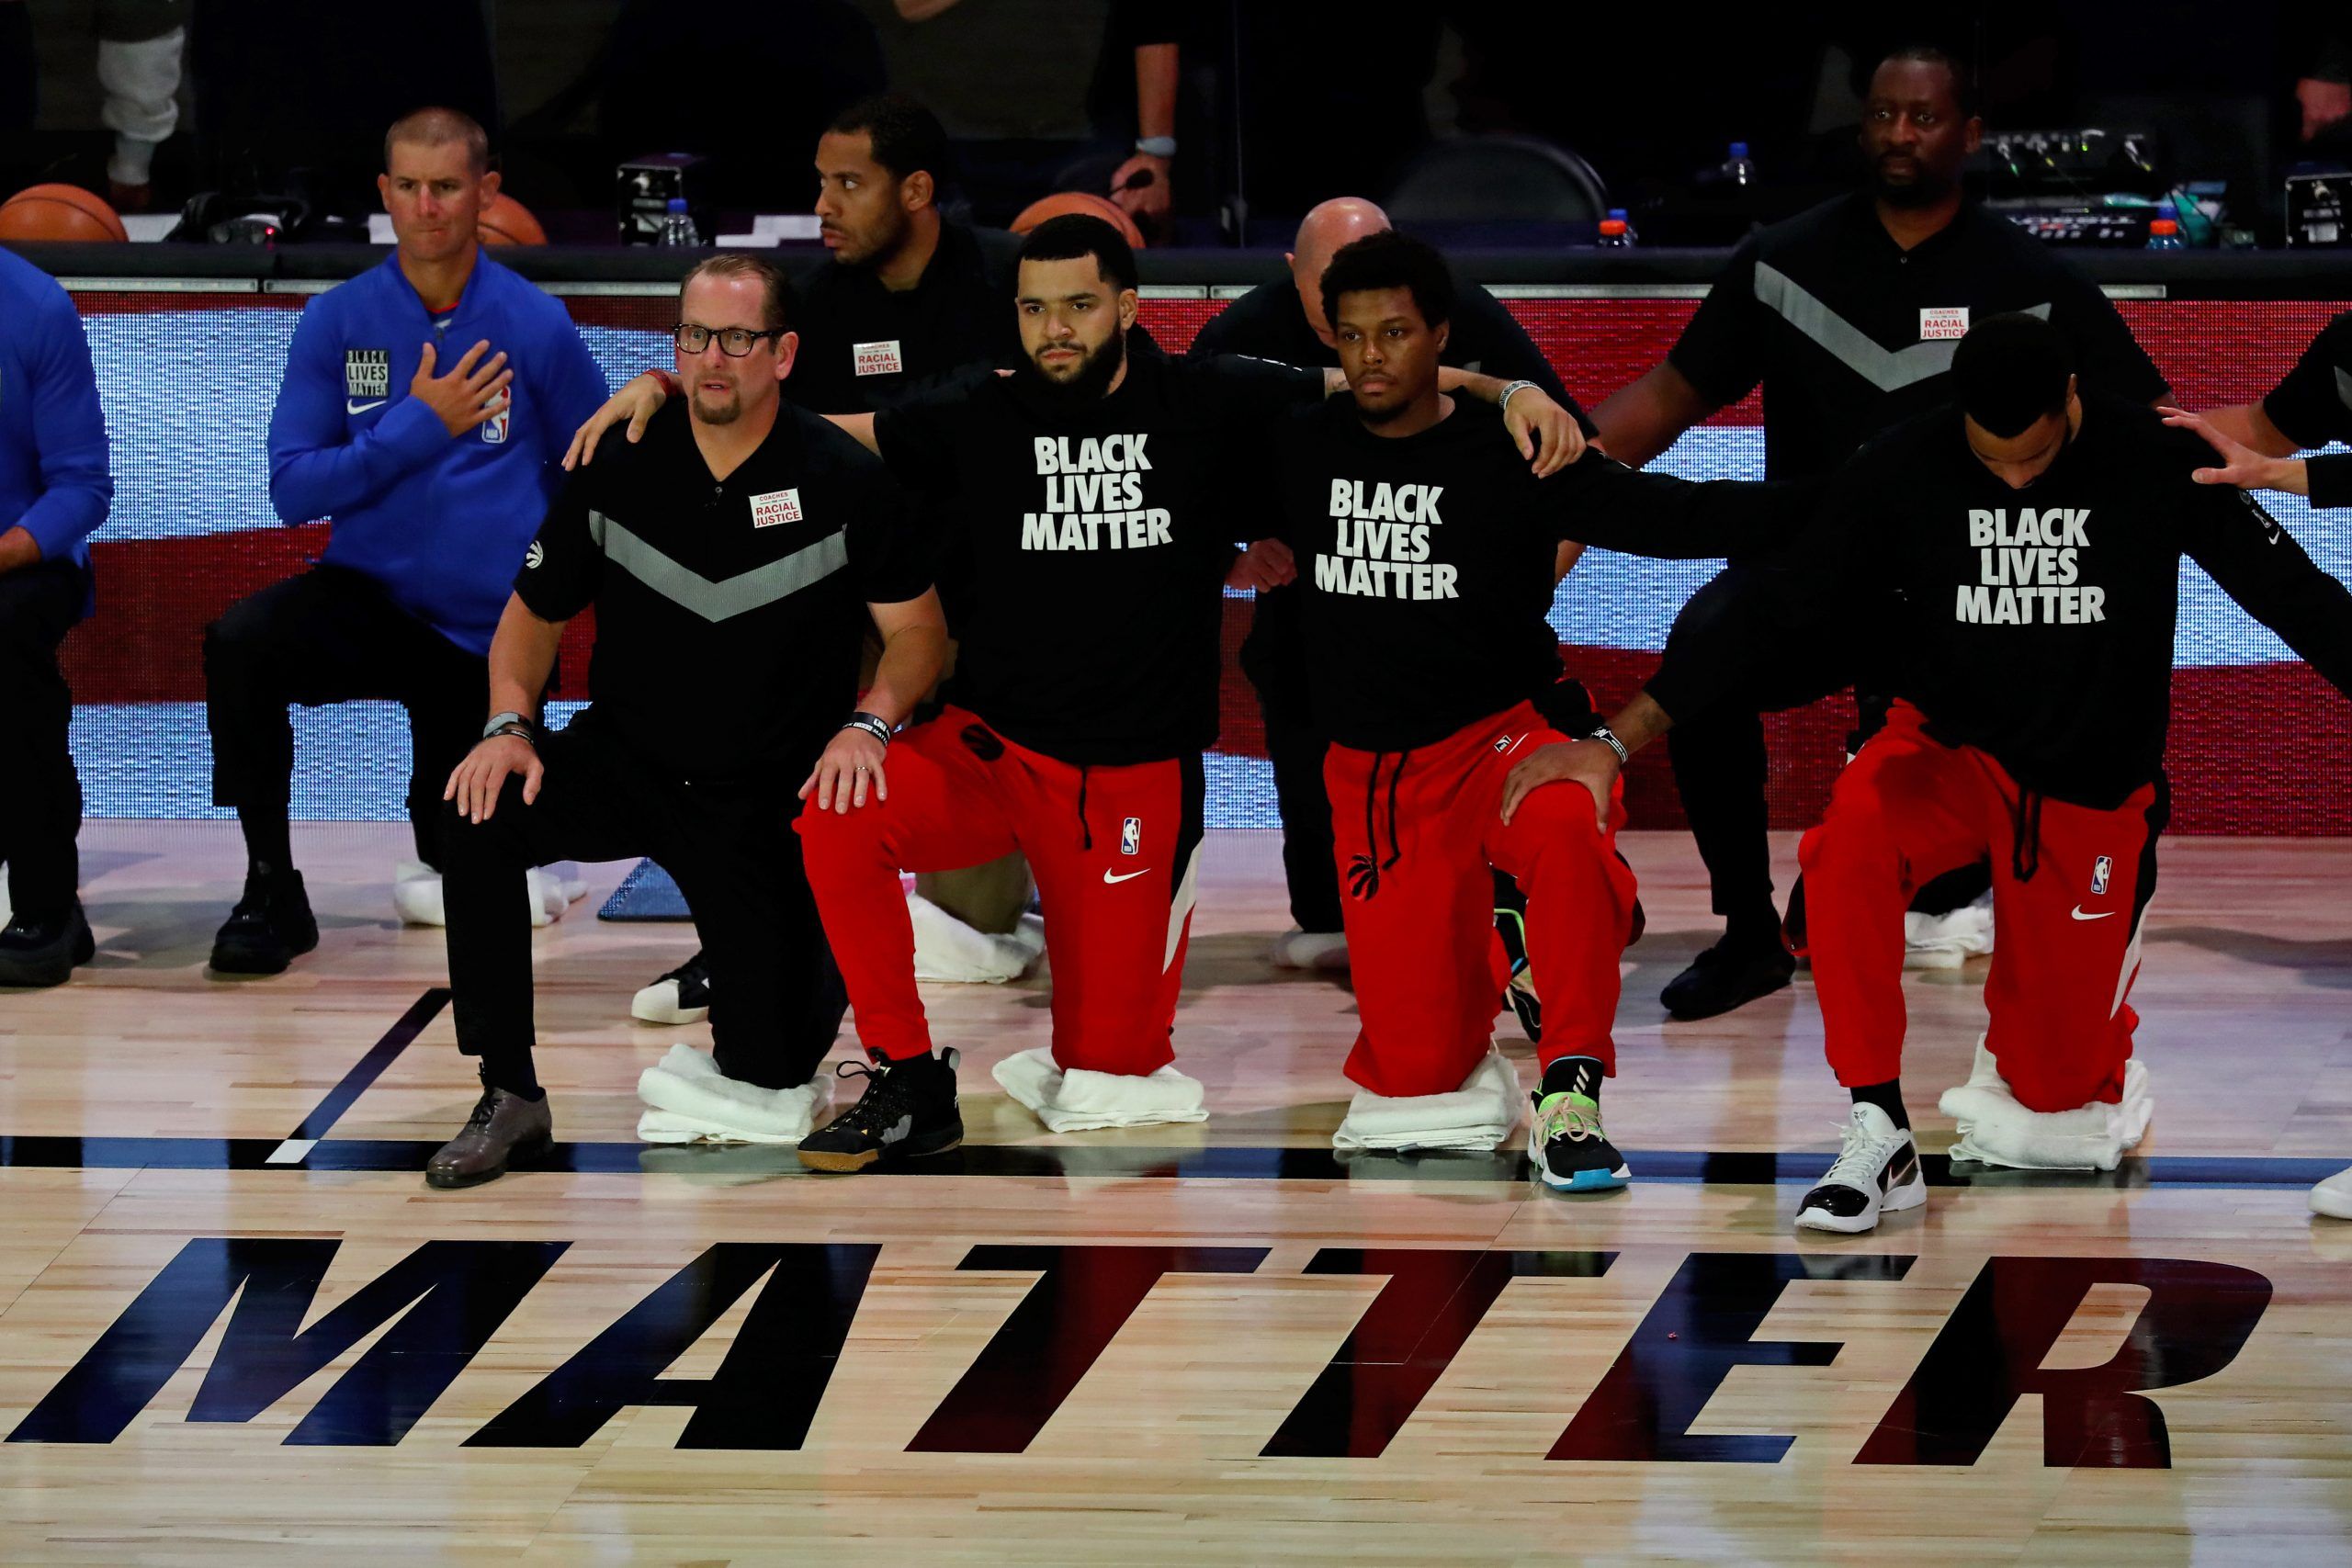 Renteria, White Sox players show BLM support